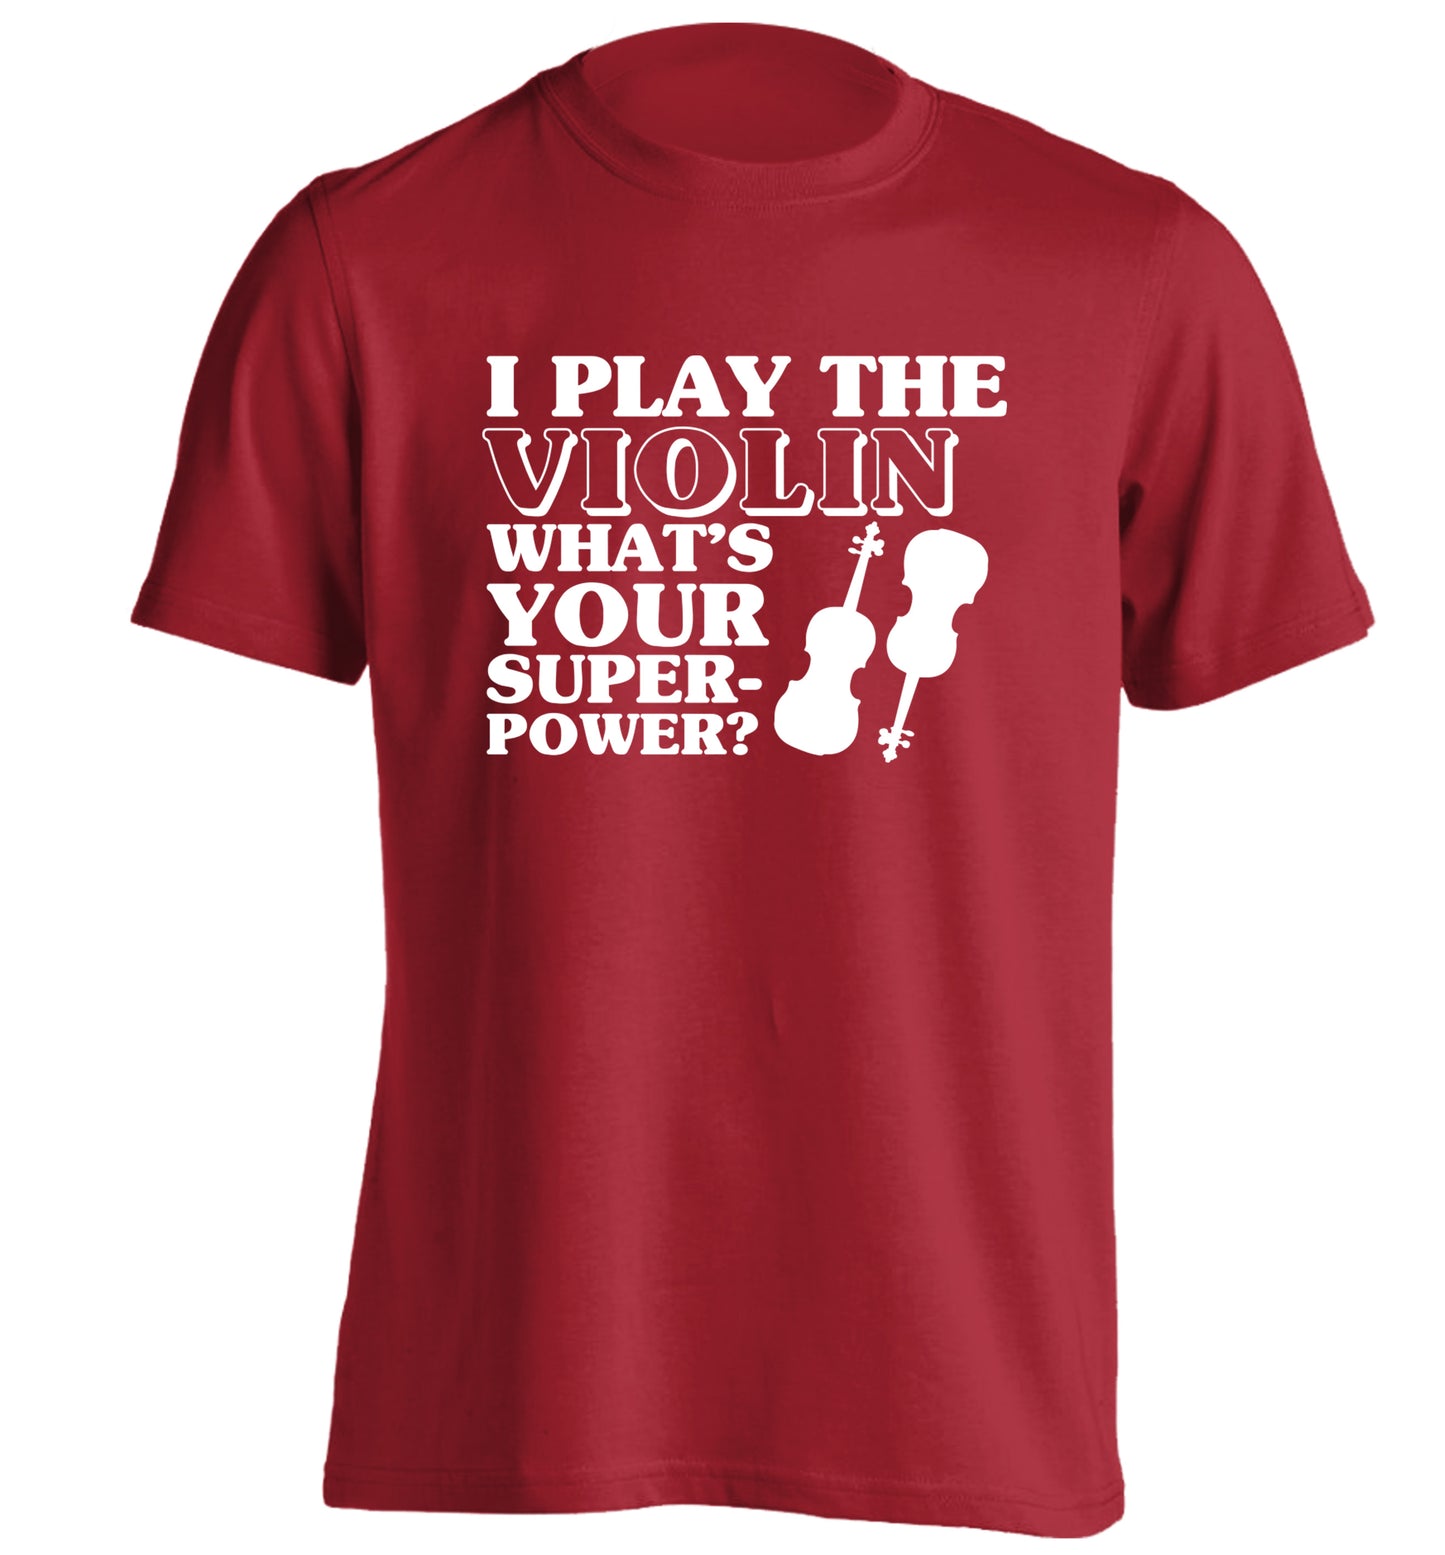 I Play Violin What's Your Superpower? adults unisex red Tshirt 2XL